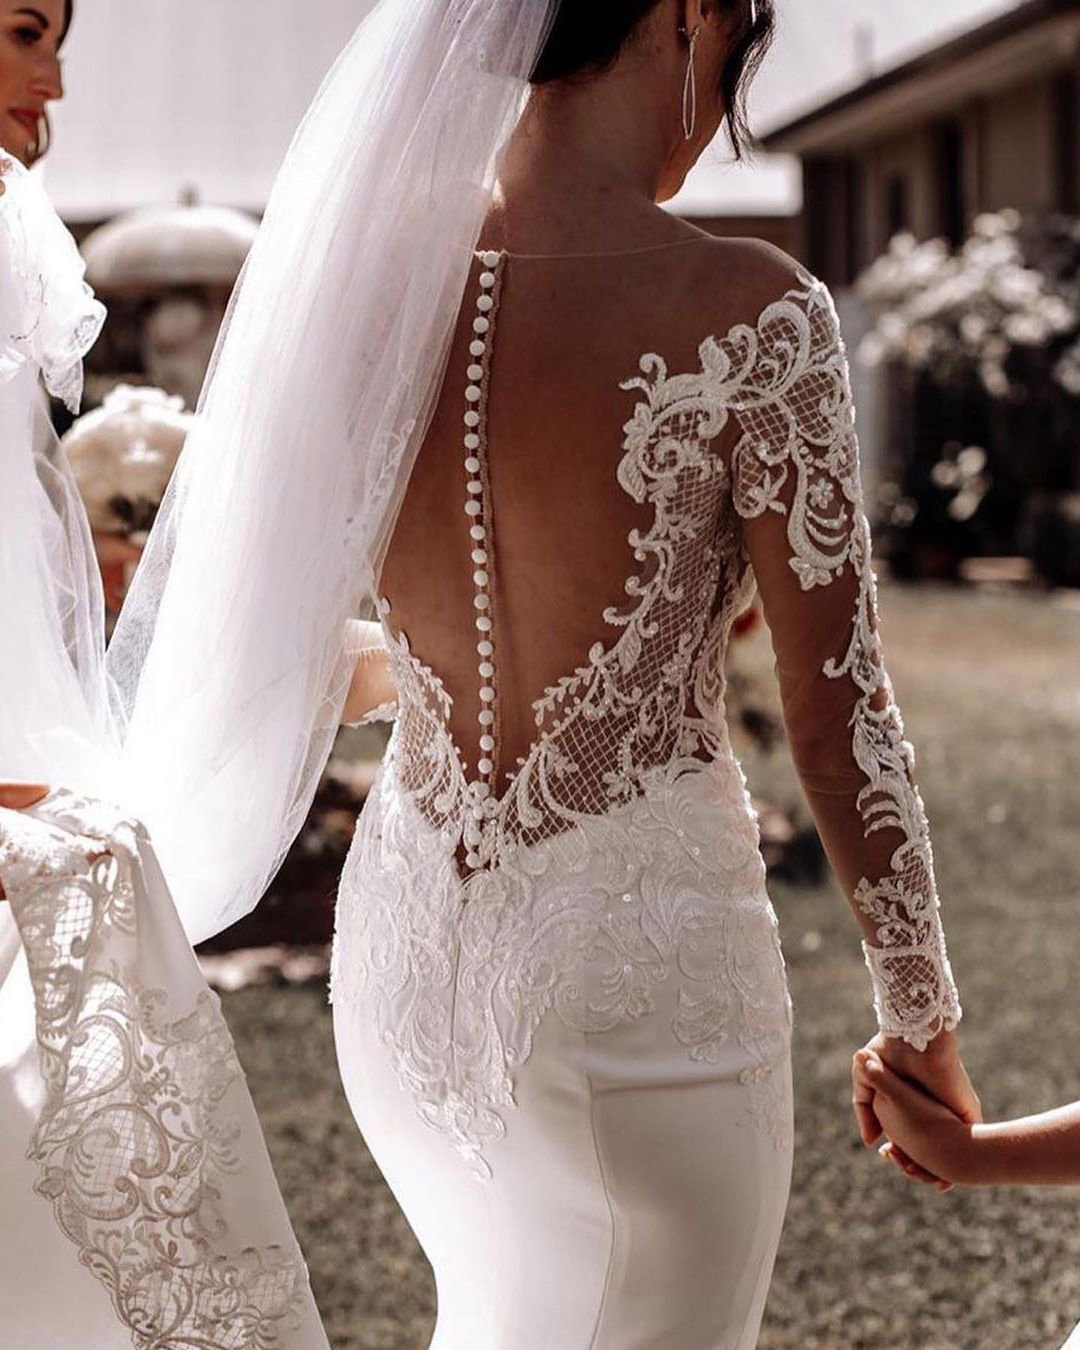 tattoo effect wedding dresses lace with illusion sleeves buttons nicolemilano